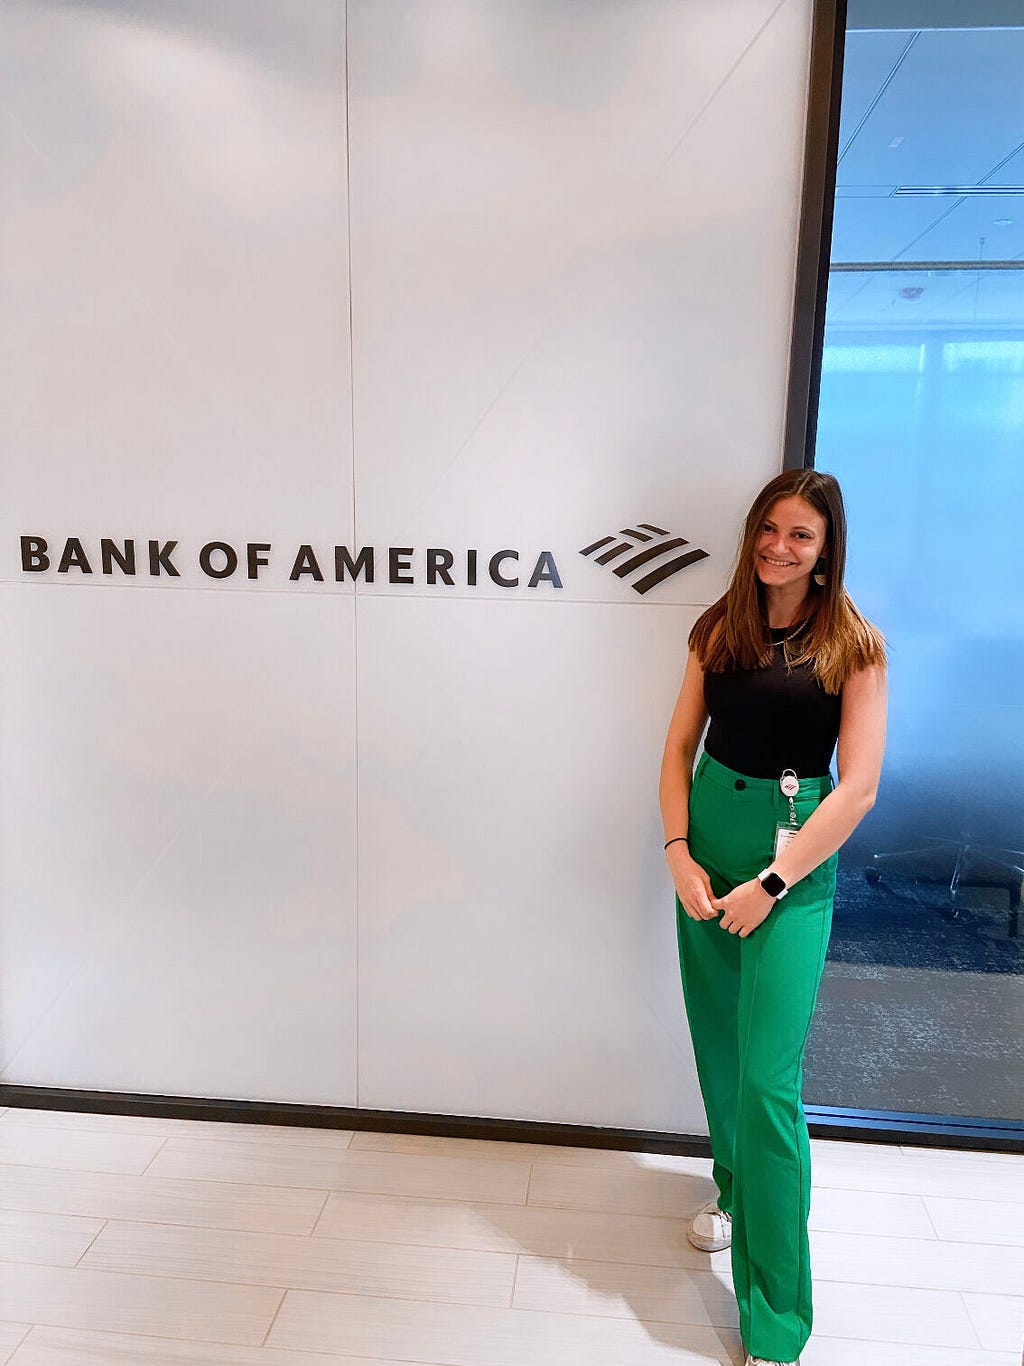 Reese smiles for a photo at the Bank of America office next to a sign with the company name